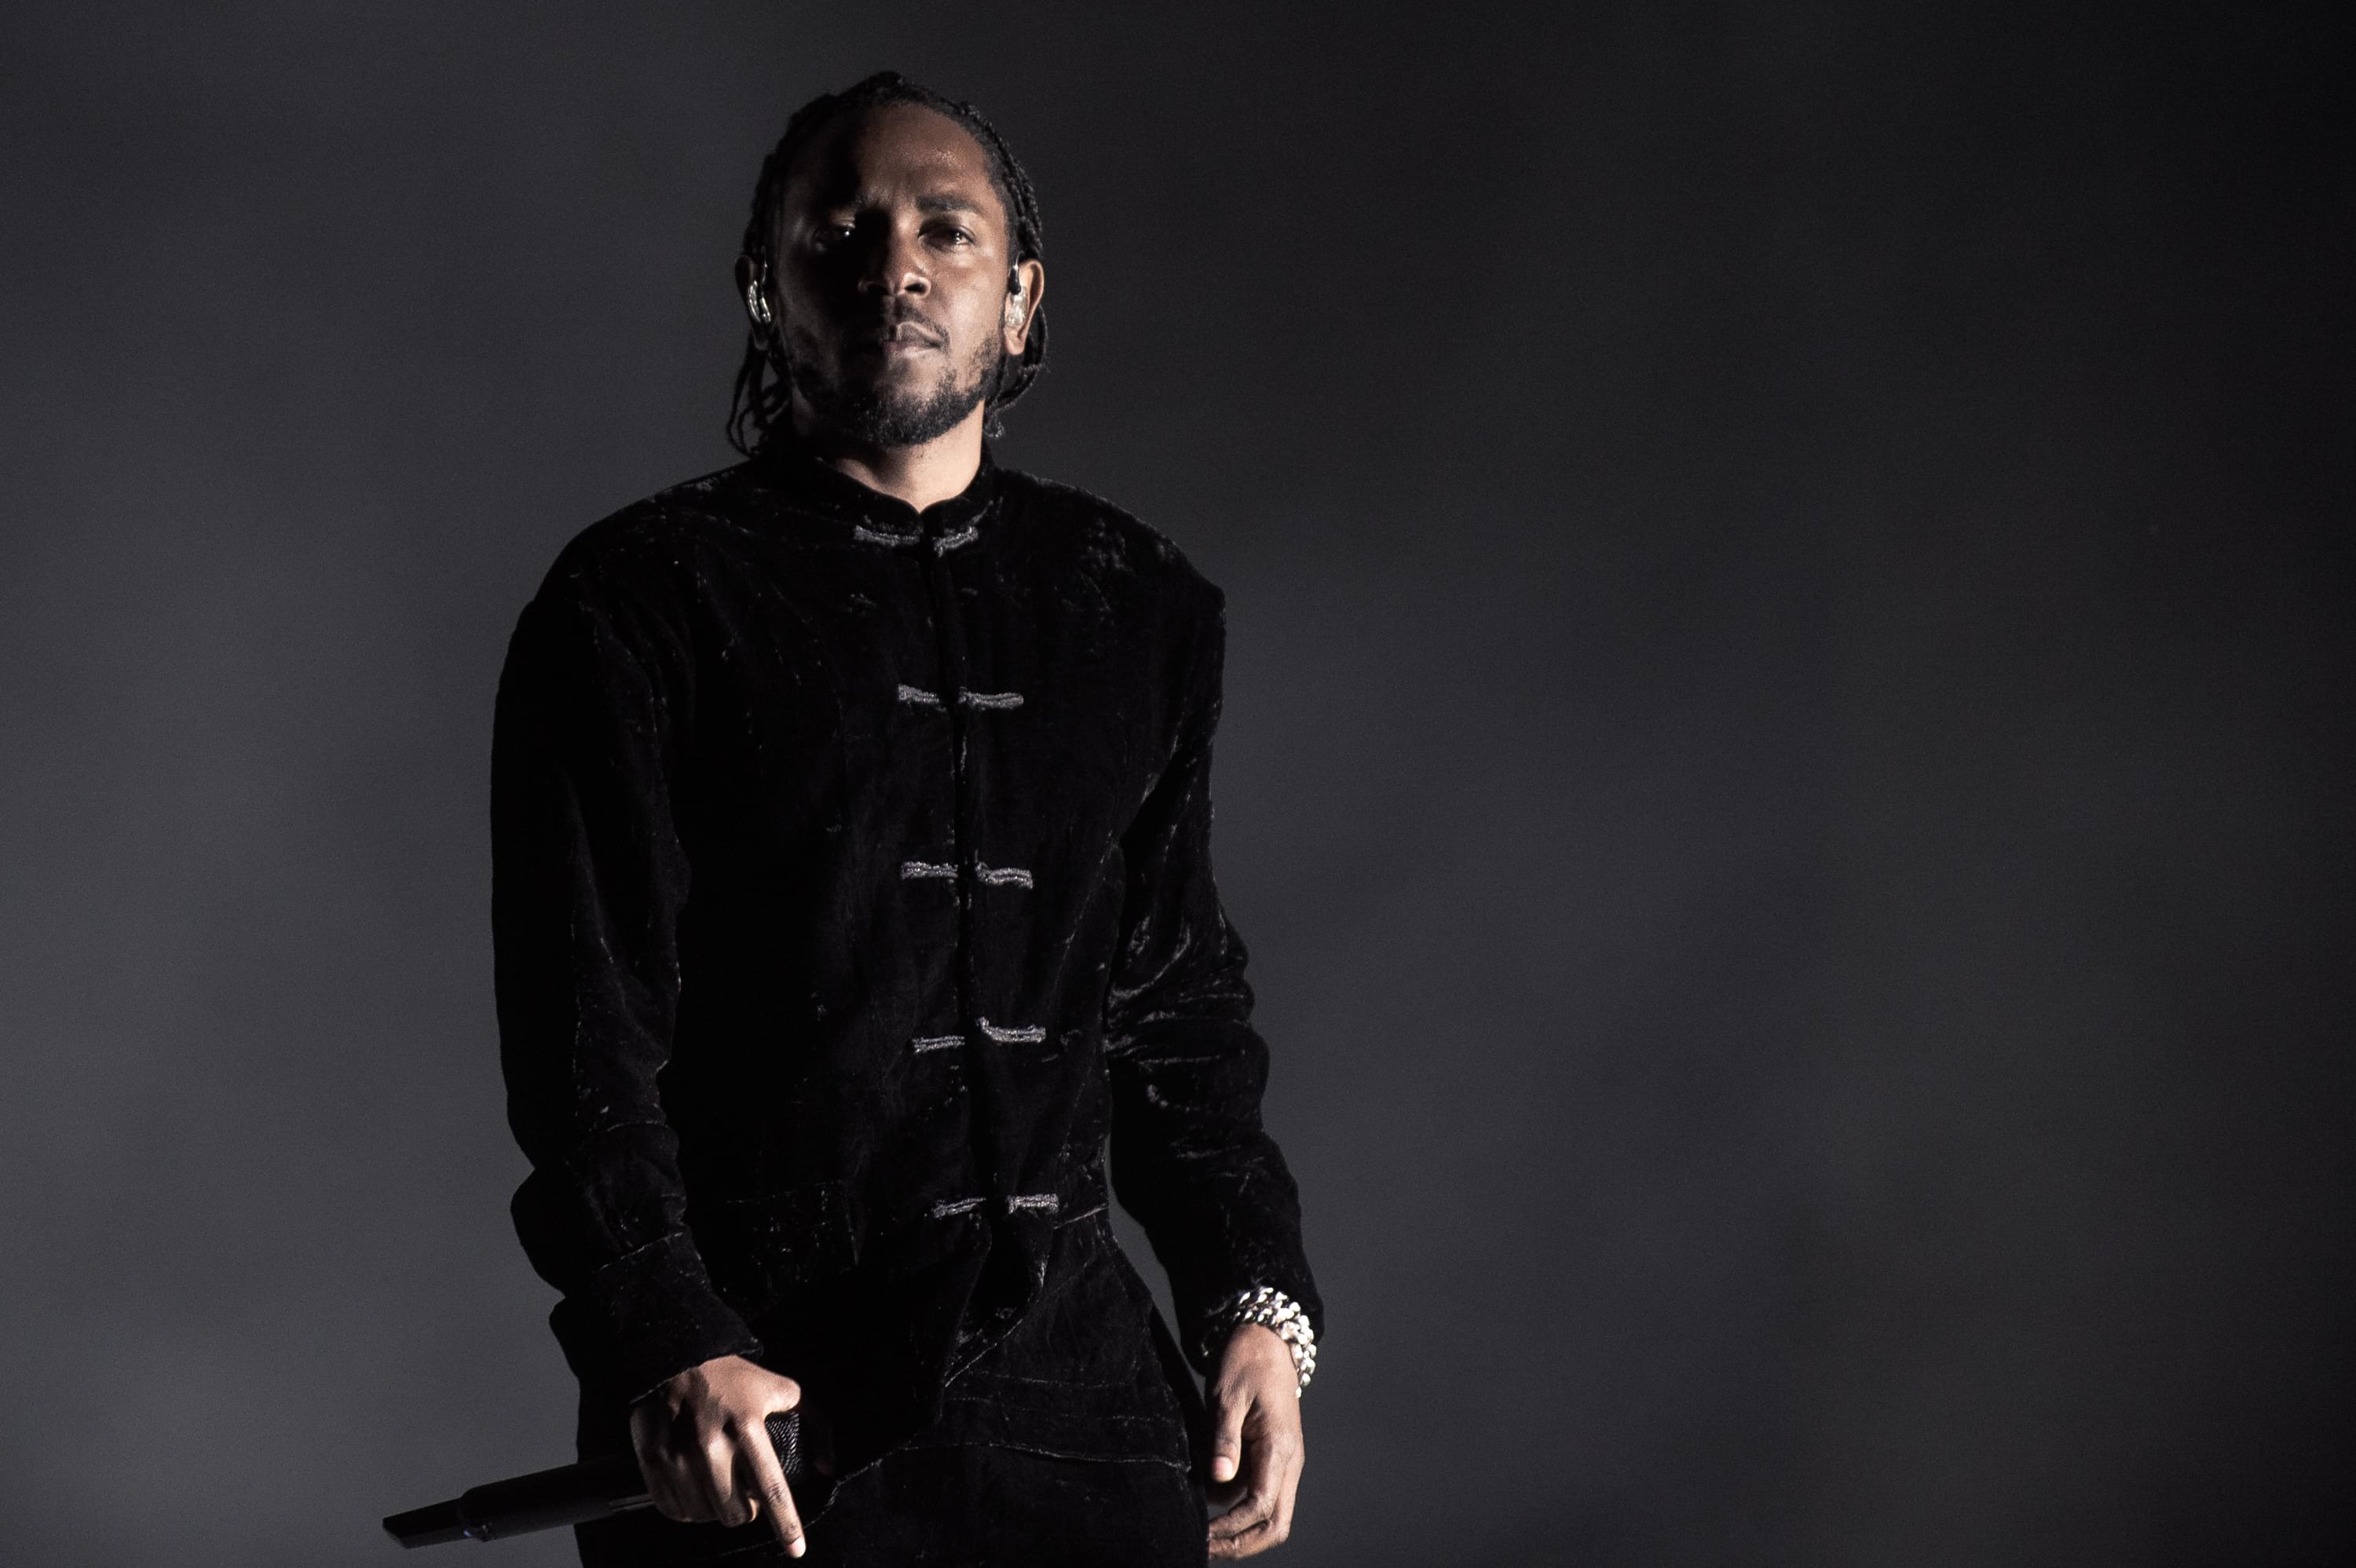 In Less Than A Month, Kendrick Lamar’s “DAMN.” Is Certified Platinum